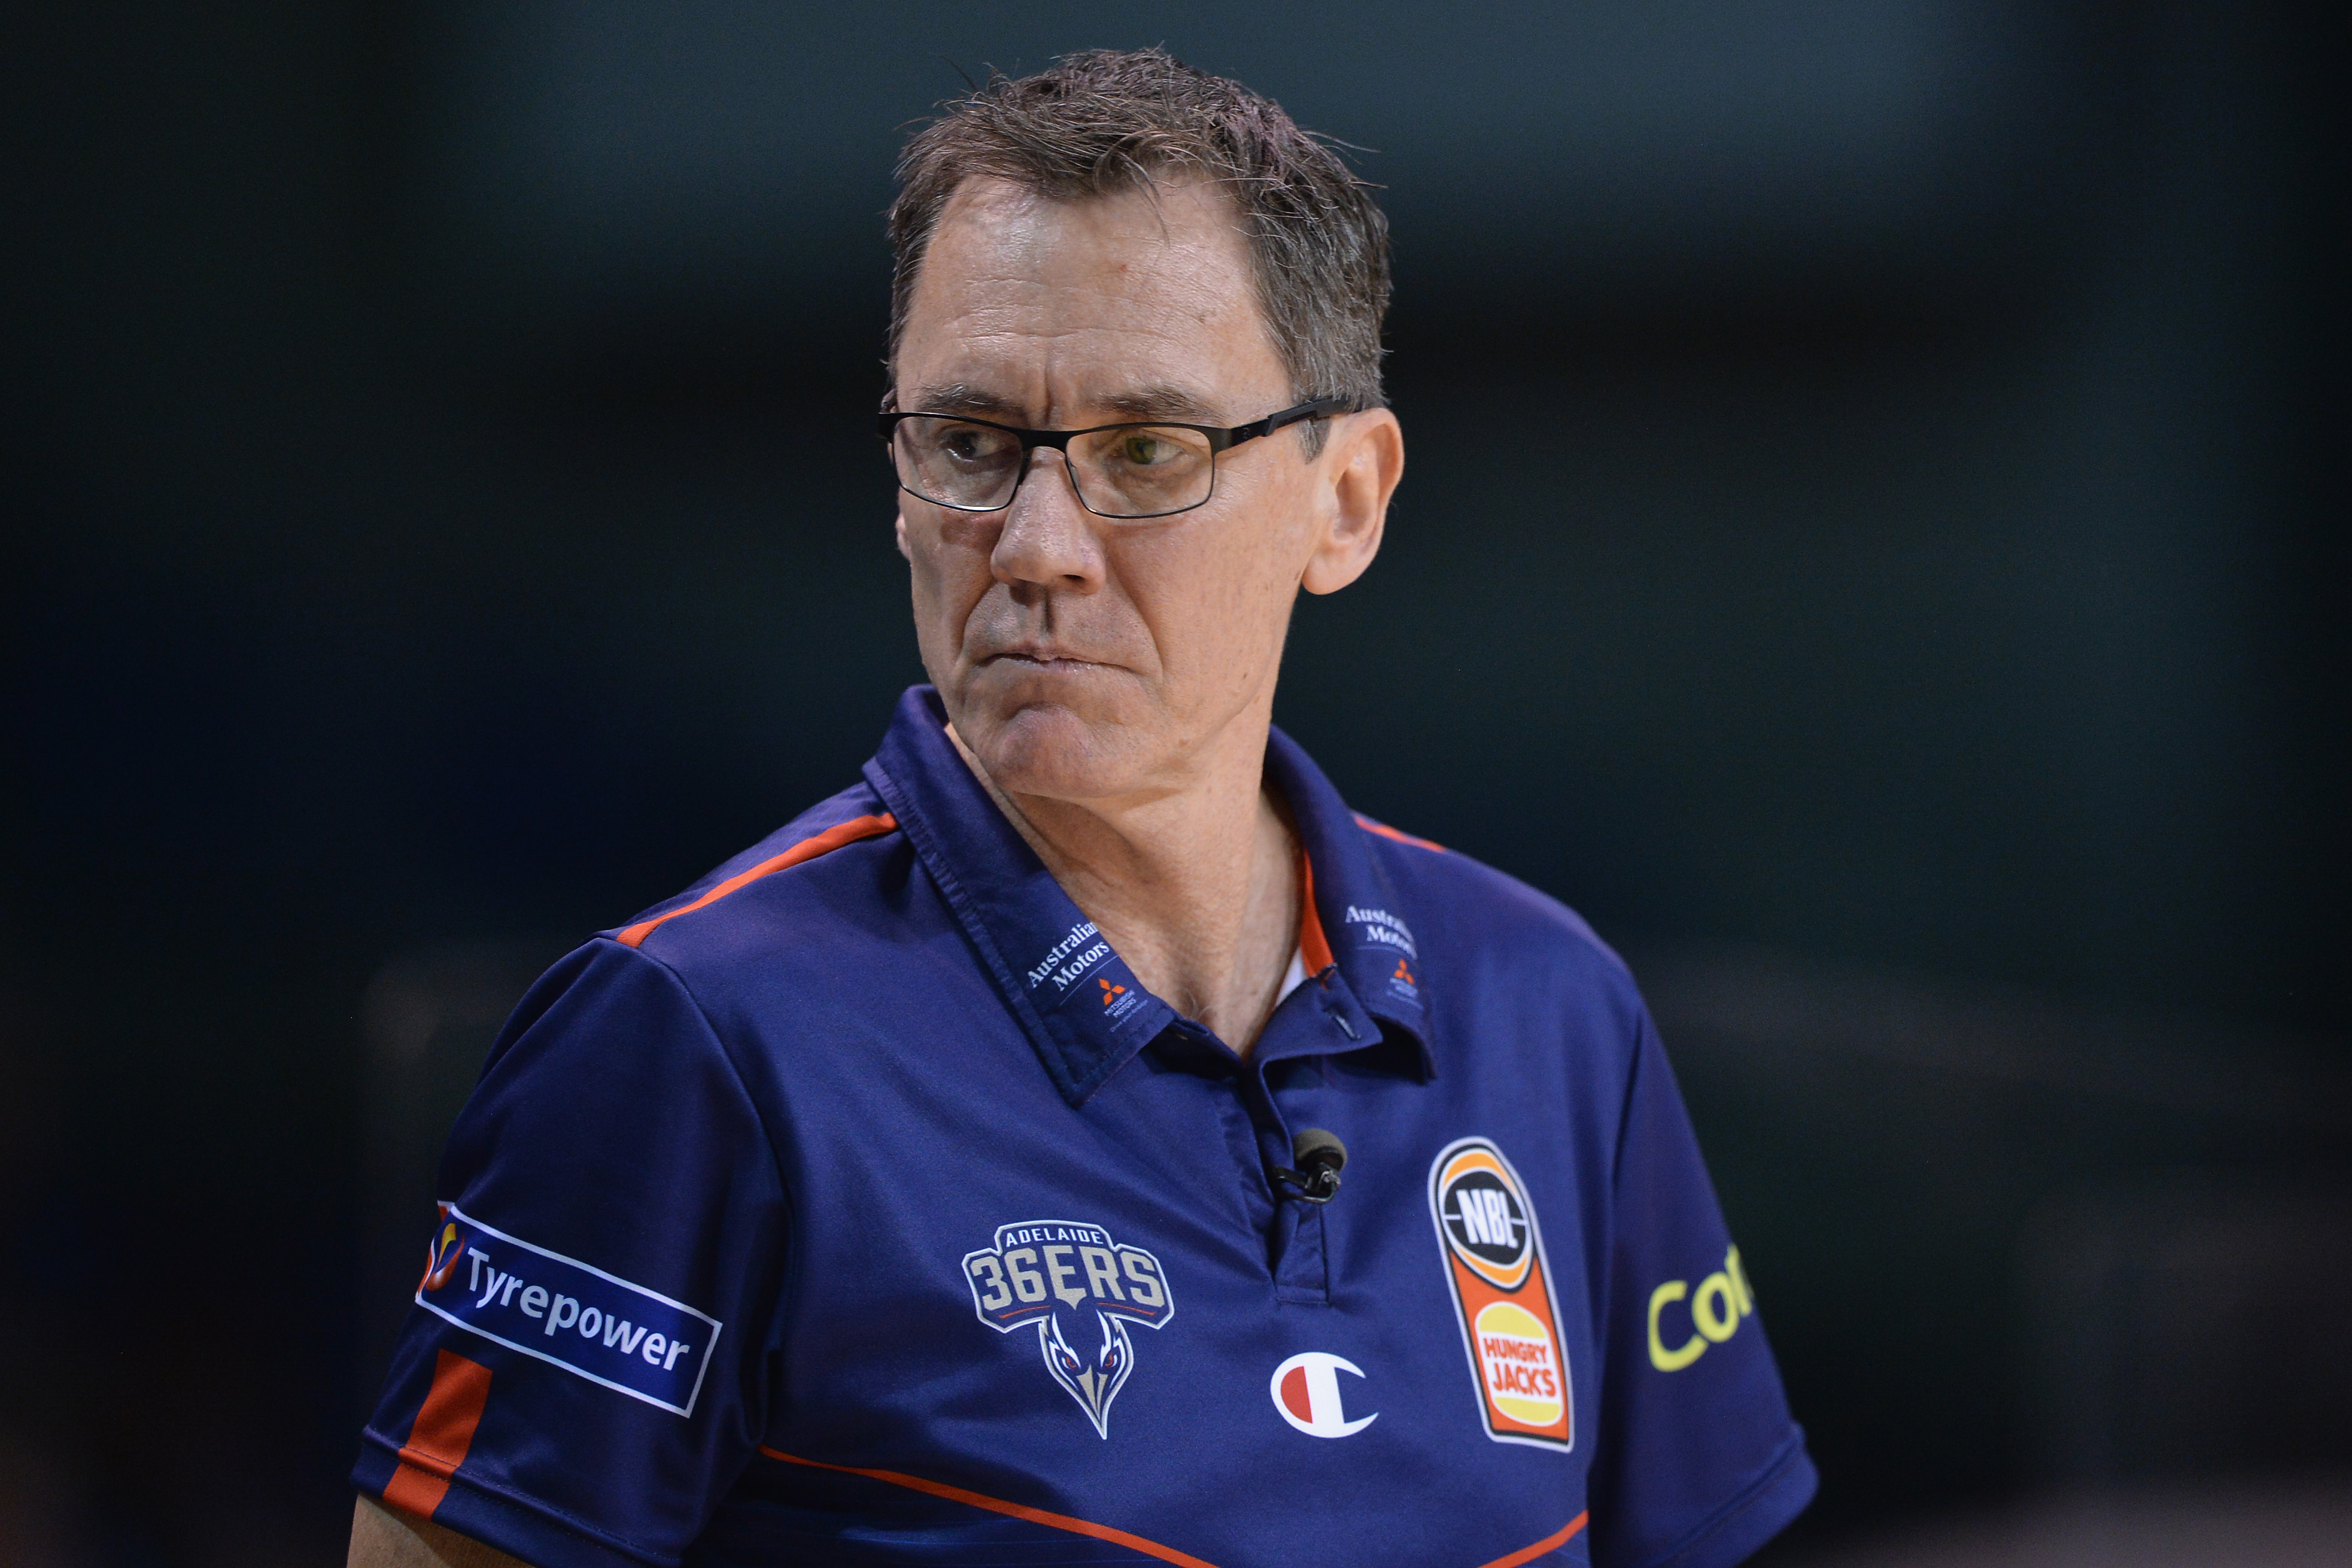 Head Coach Conner Henry of the 36ers looks on during the round 19 NBL match between the New Zealand Breakers and the Adelaide 36ers.